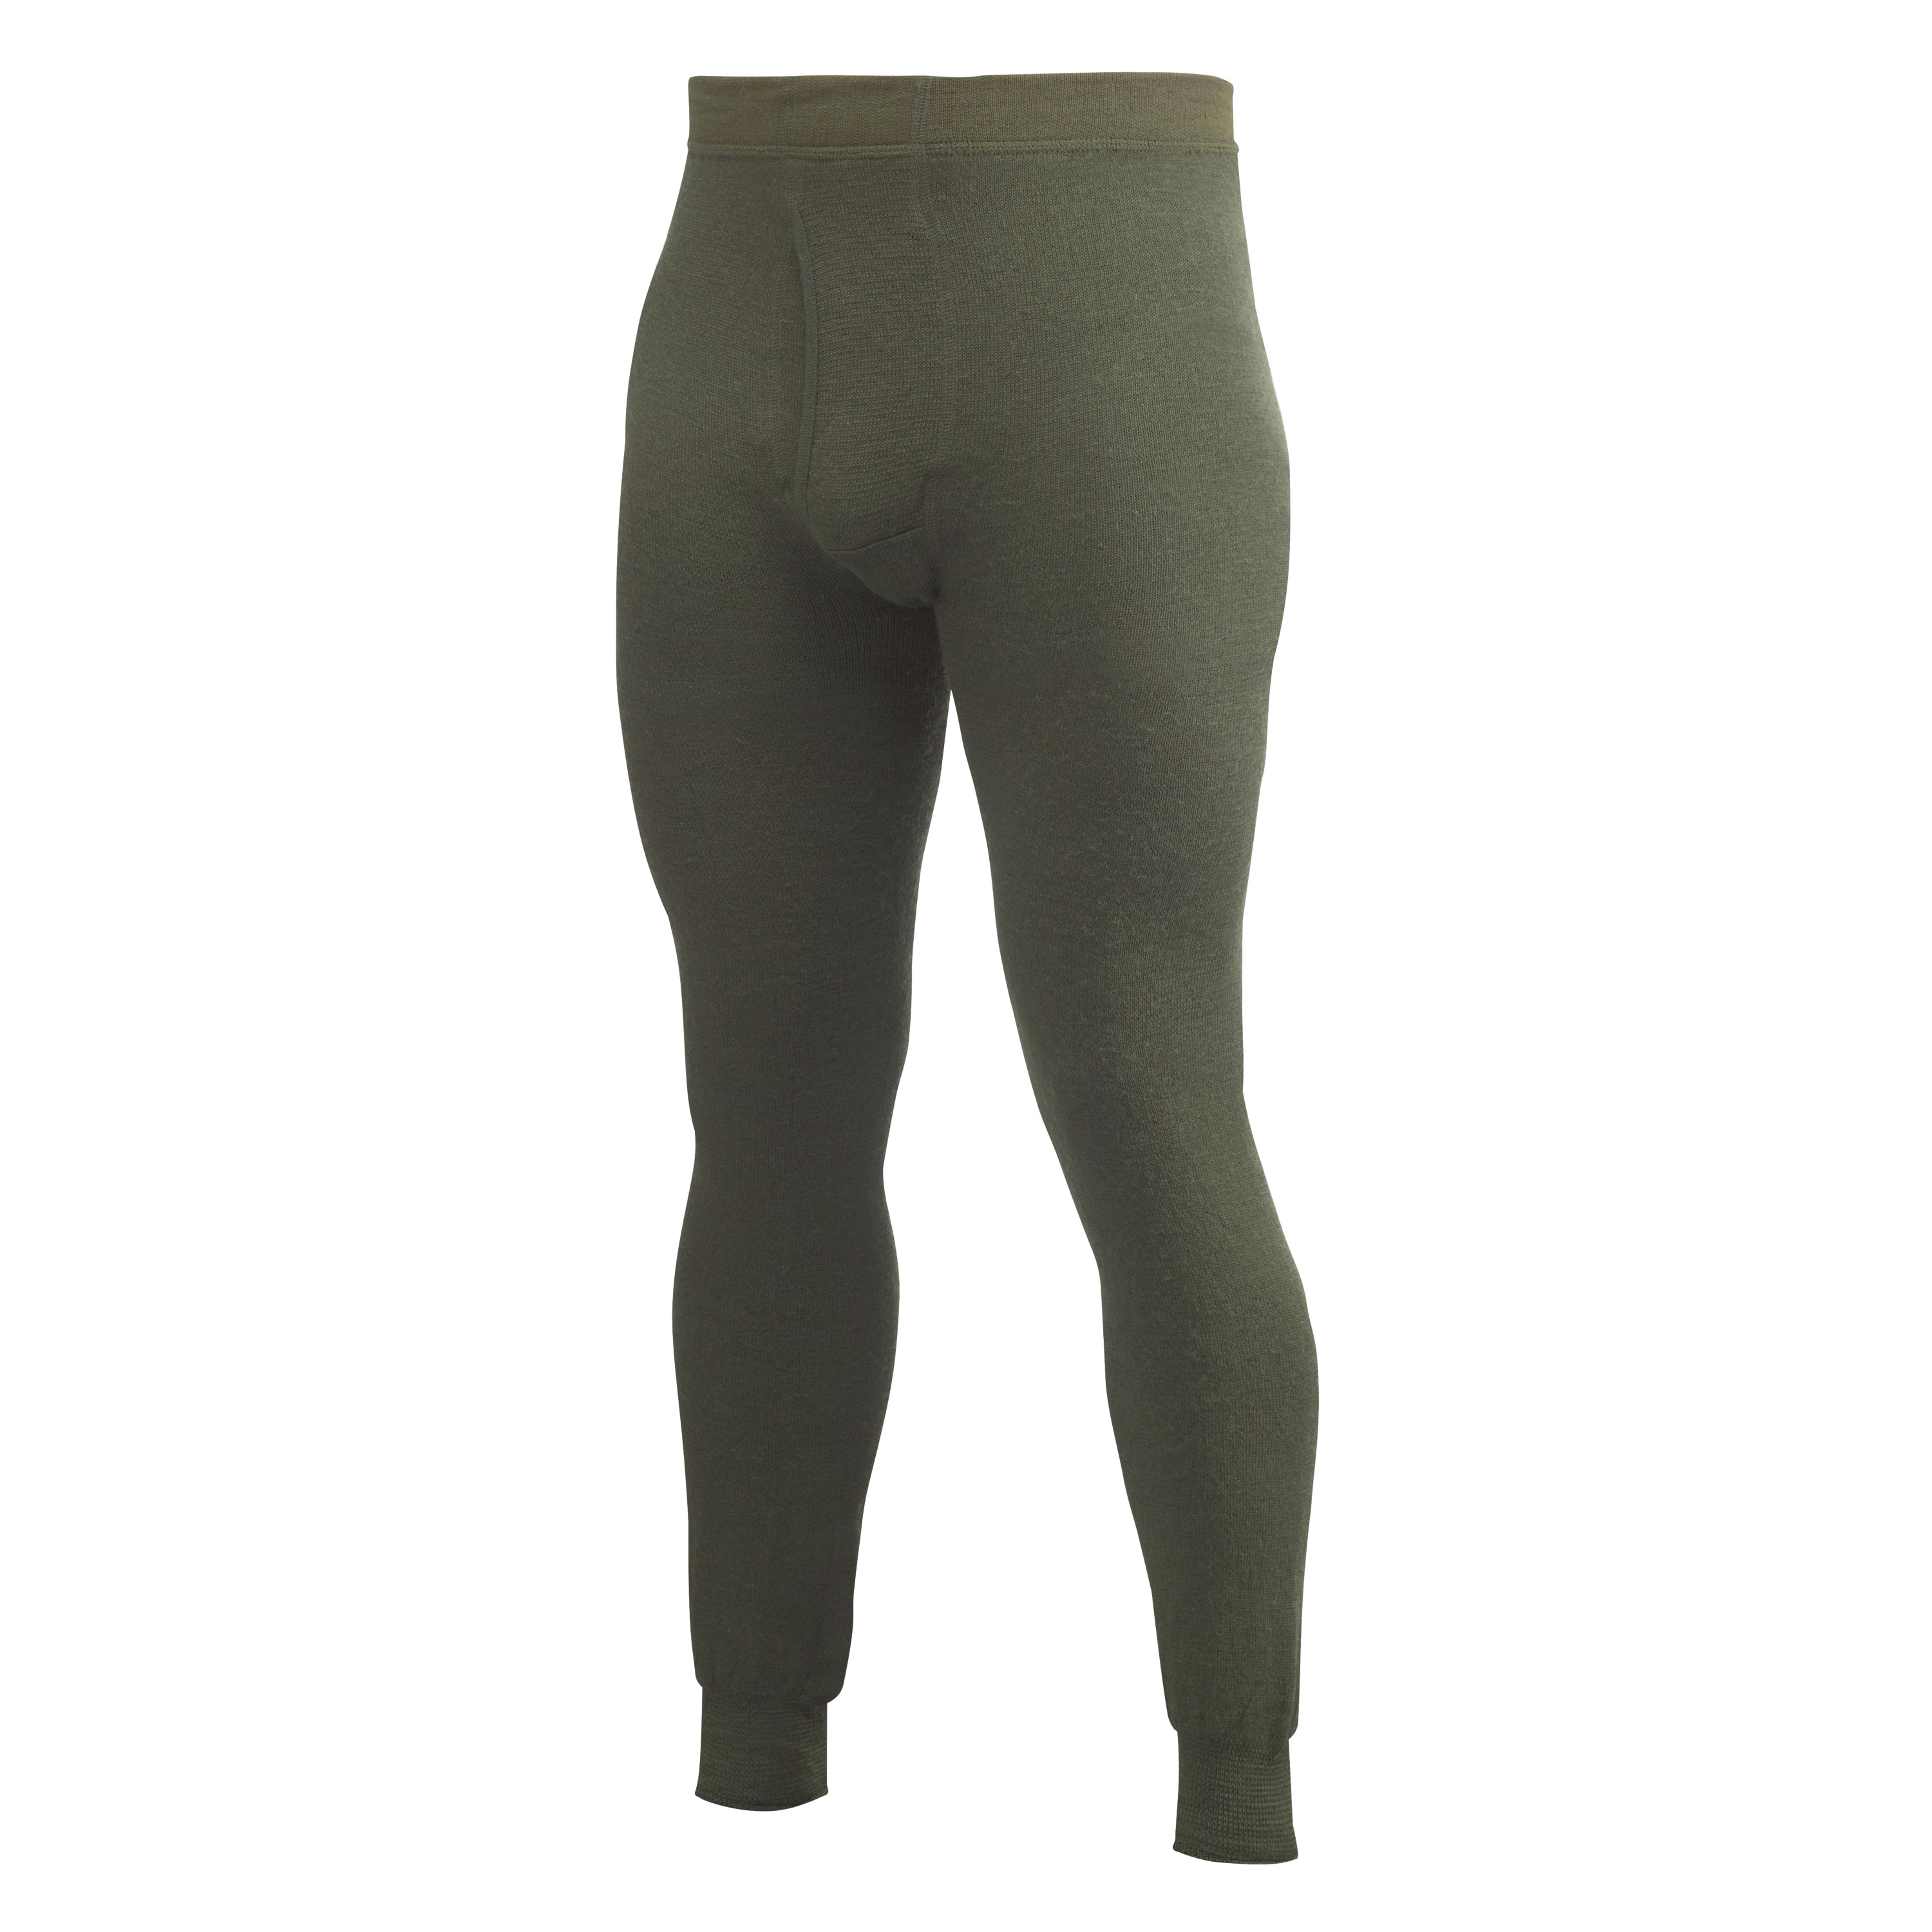 Purchase the Woolpower Long Underwear 200 g. olive green by ASMC